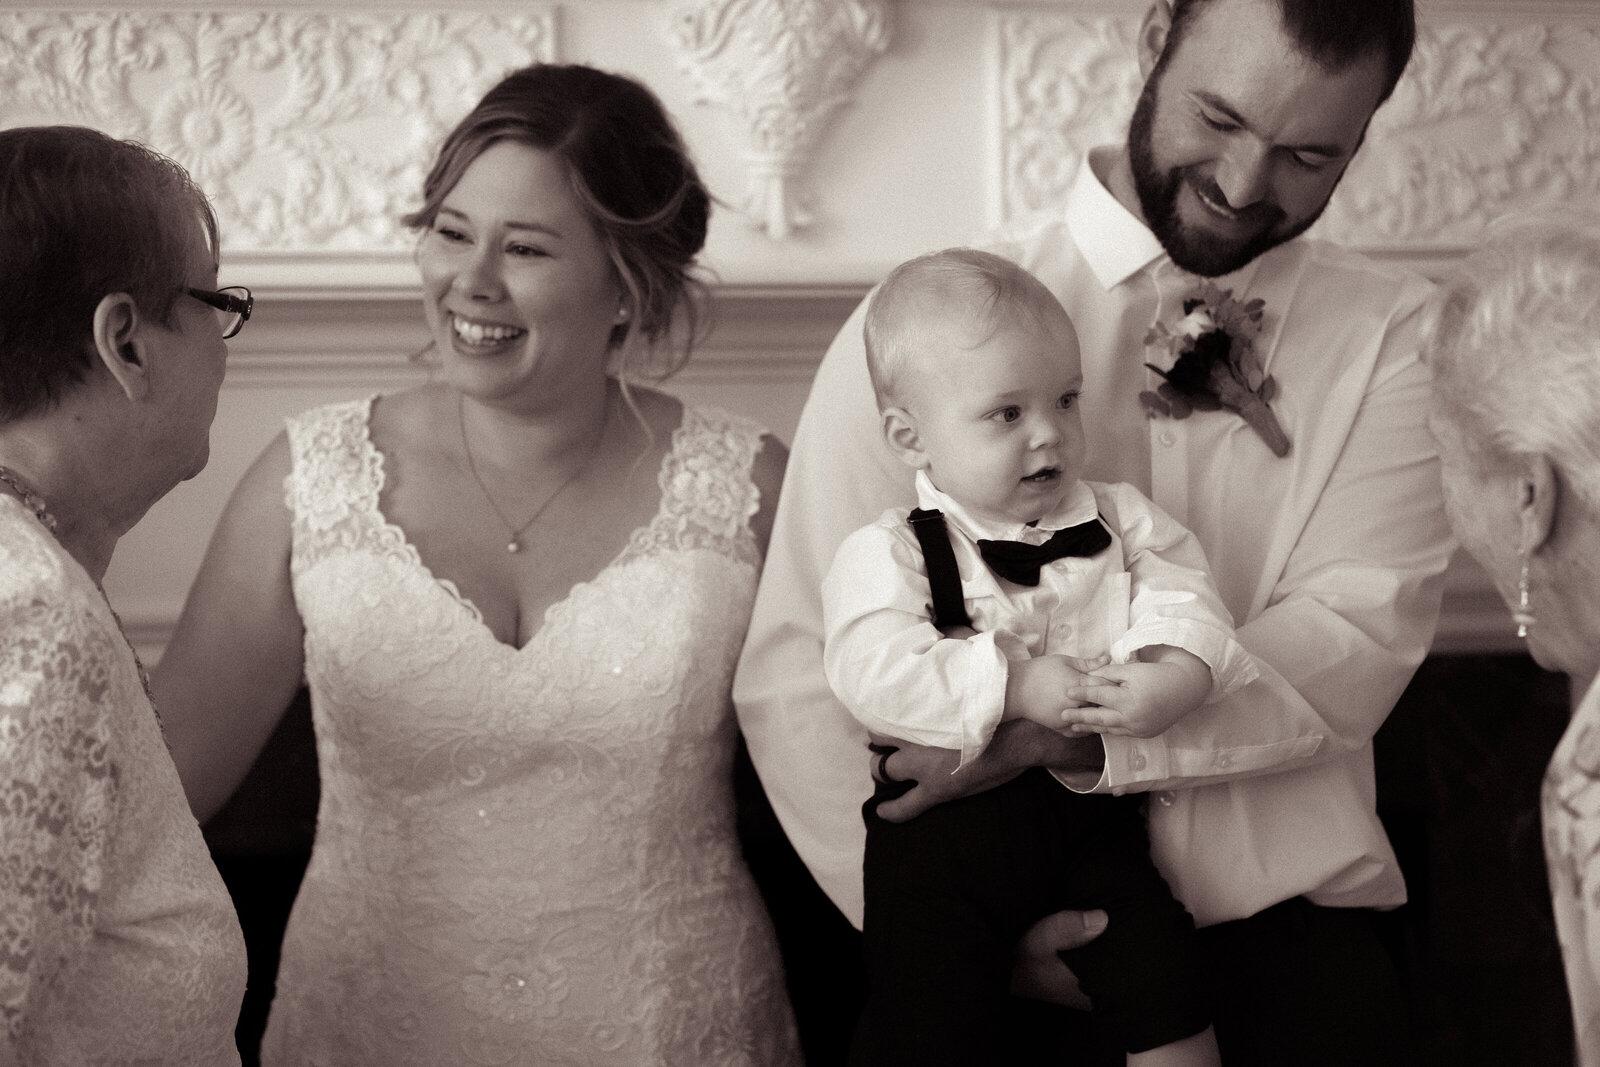 cinematic, relaxed photo of groom holding son, who's looking at grandma, while bride talks to a guest.